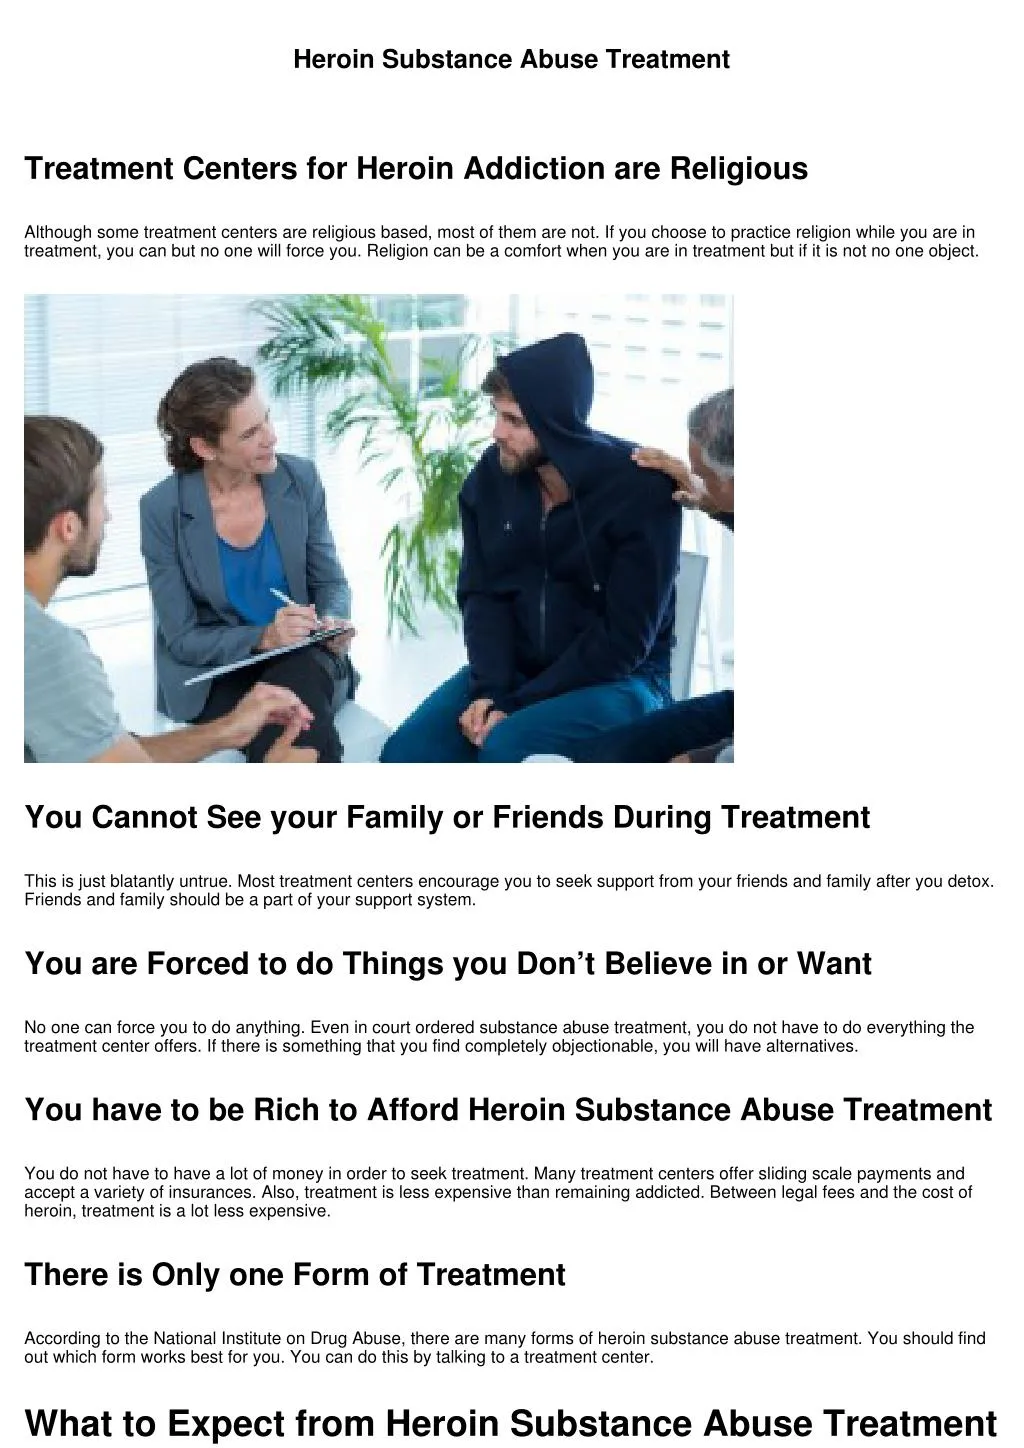 heroin substance abuse treatment